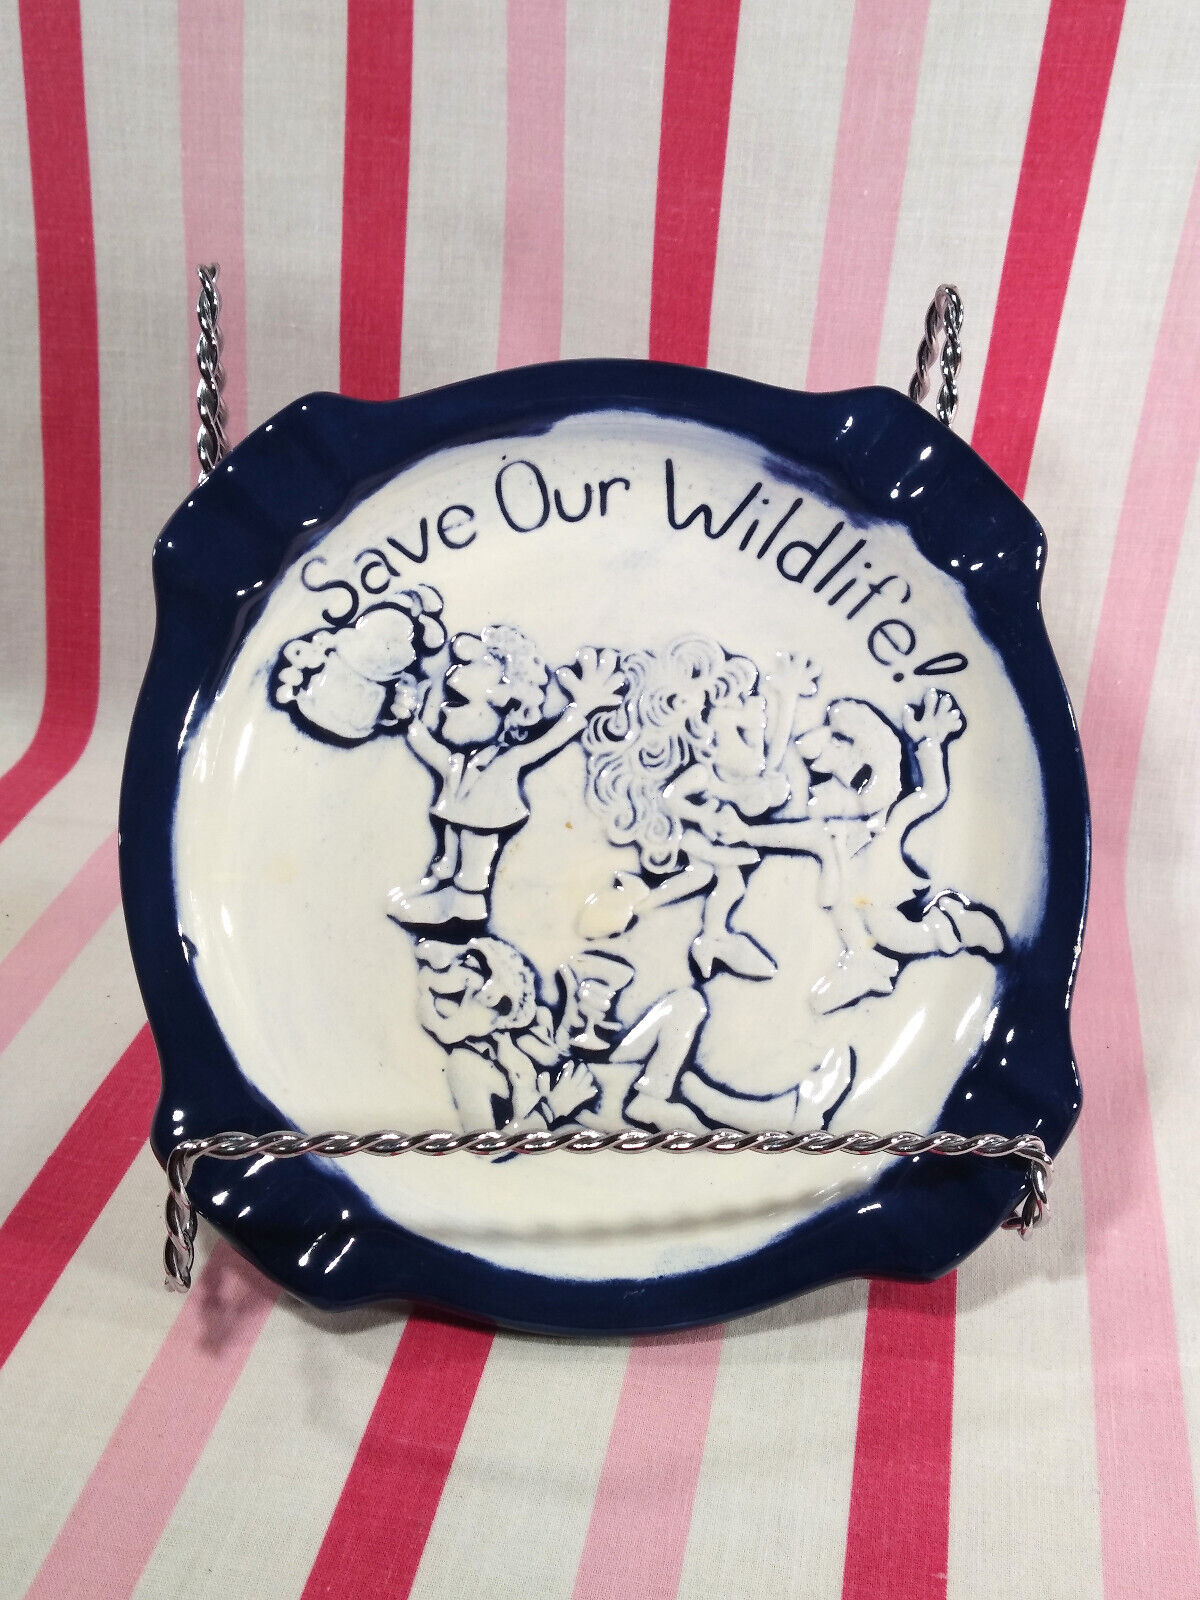 Primary image for Vintage 1970's ‘Save Our Wildlife’ Holland Mold Ceramic Cobalt Blue Ashtray